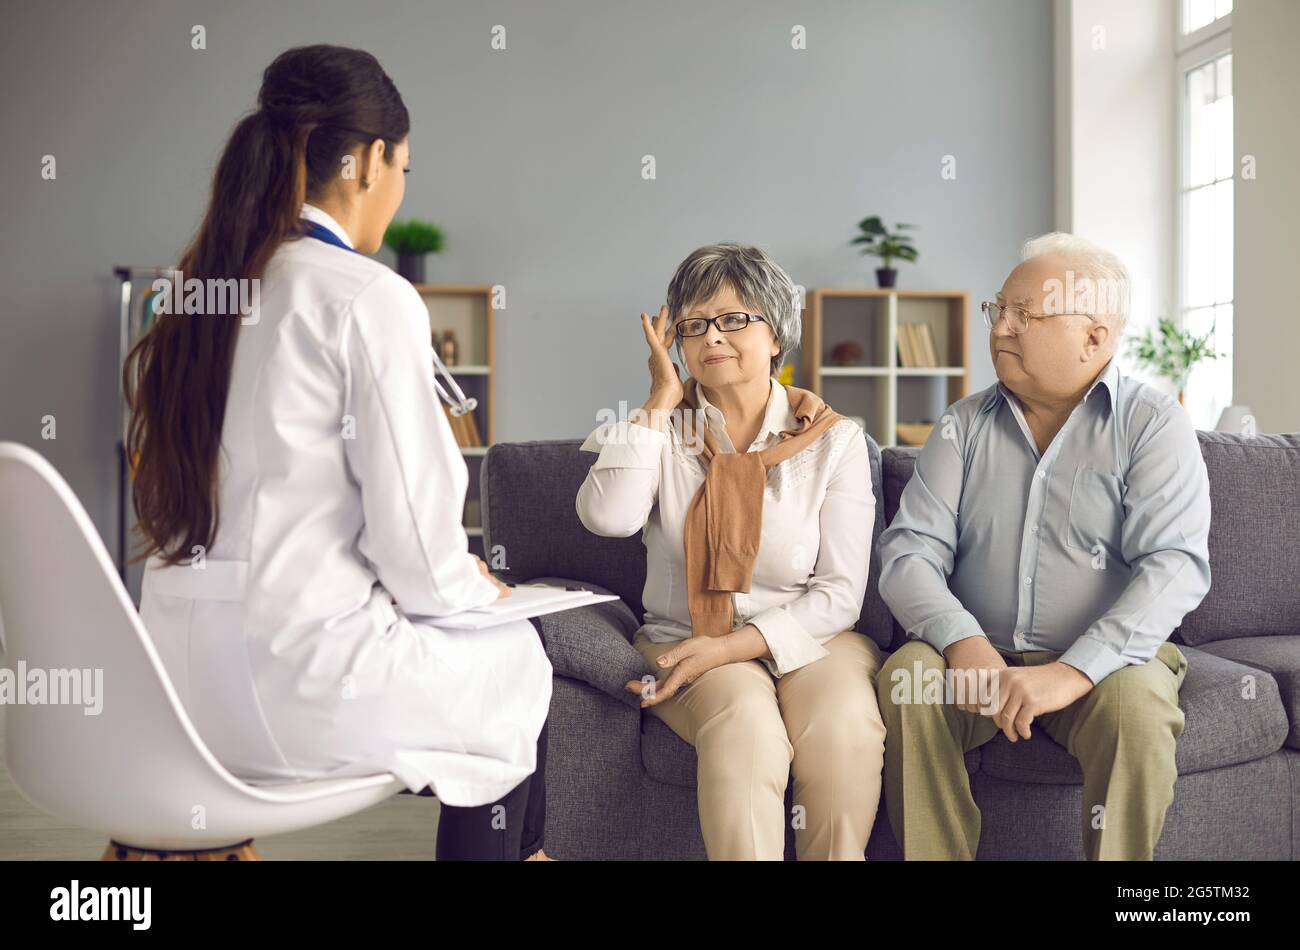 Doctor listening to senior patients sharing their health concerns during home visit Stock Photo